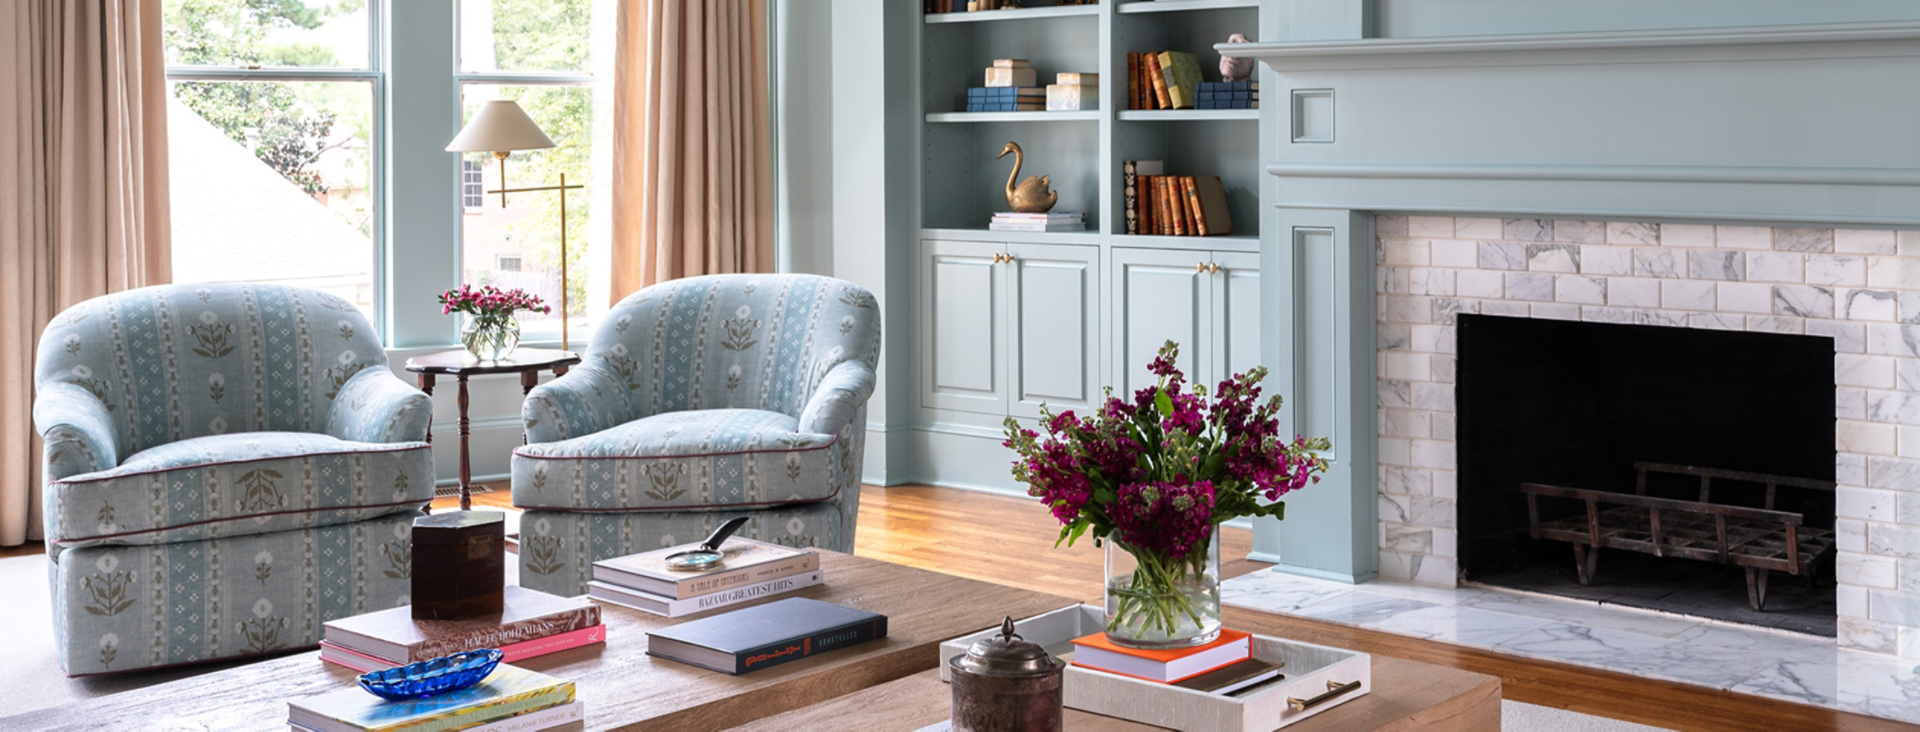 Light blue-green painted living room with matching round back arm chairs near tiled fireplace.